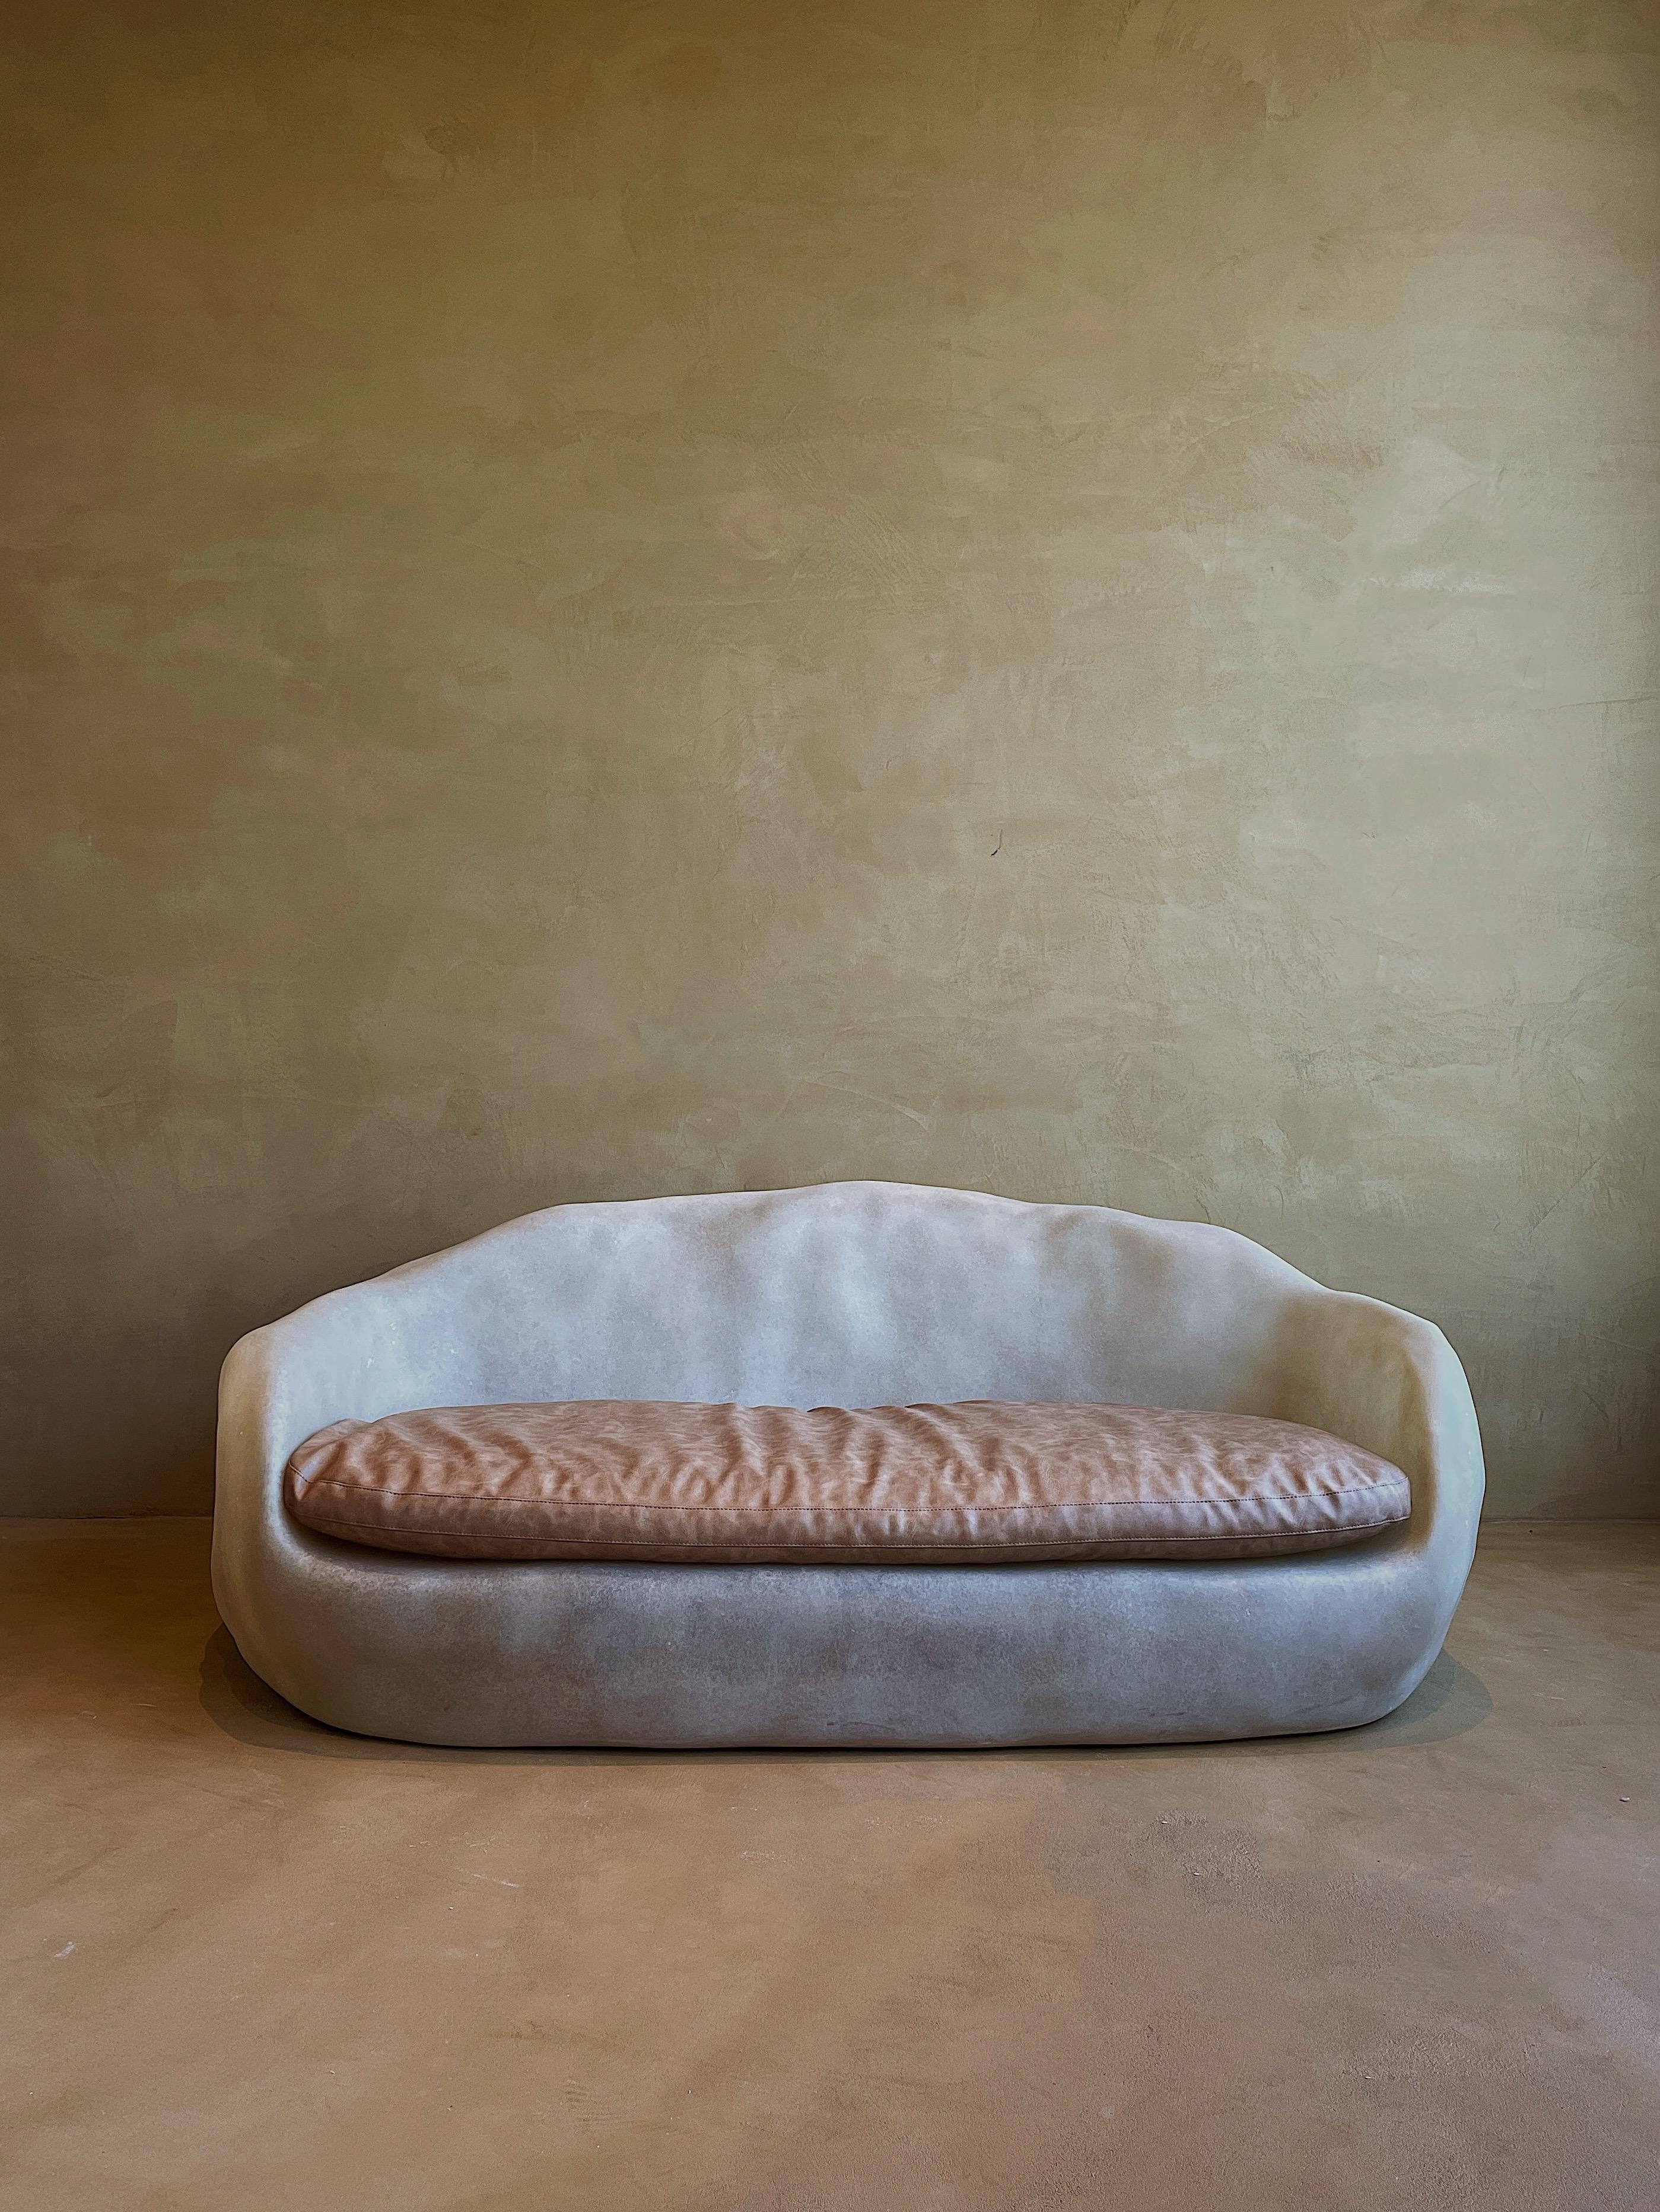 Knead sofa by kar
Dimensions: W 180 x D 100 x H 70 cm.
Materials: FRP.

Kar, is the root of Sanskrit Karma, meaning karmic repetition. We seek the cause and effect in aesthetics, inspired from the past, the present, and the future, and we